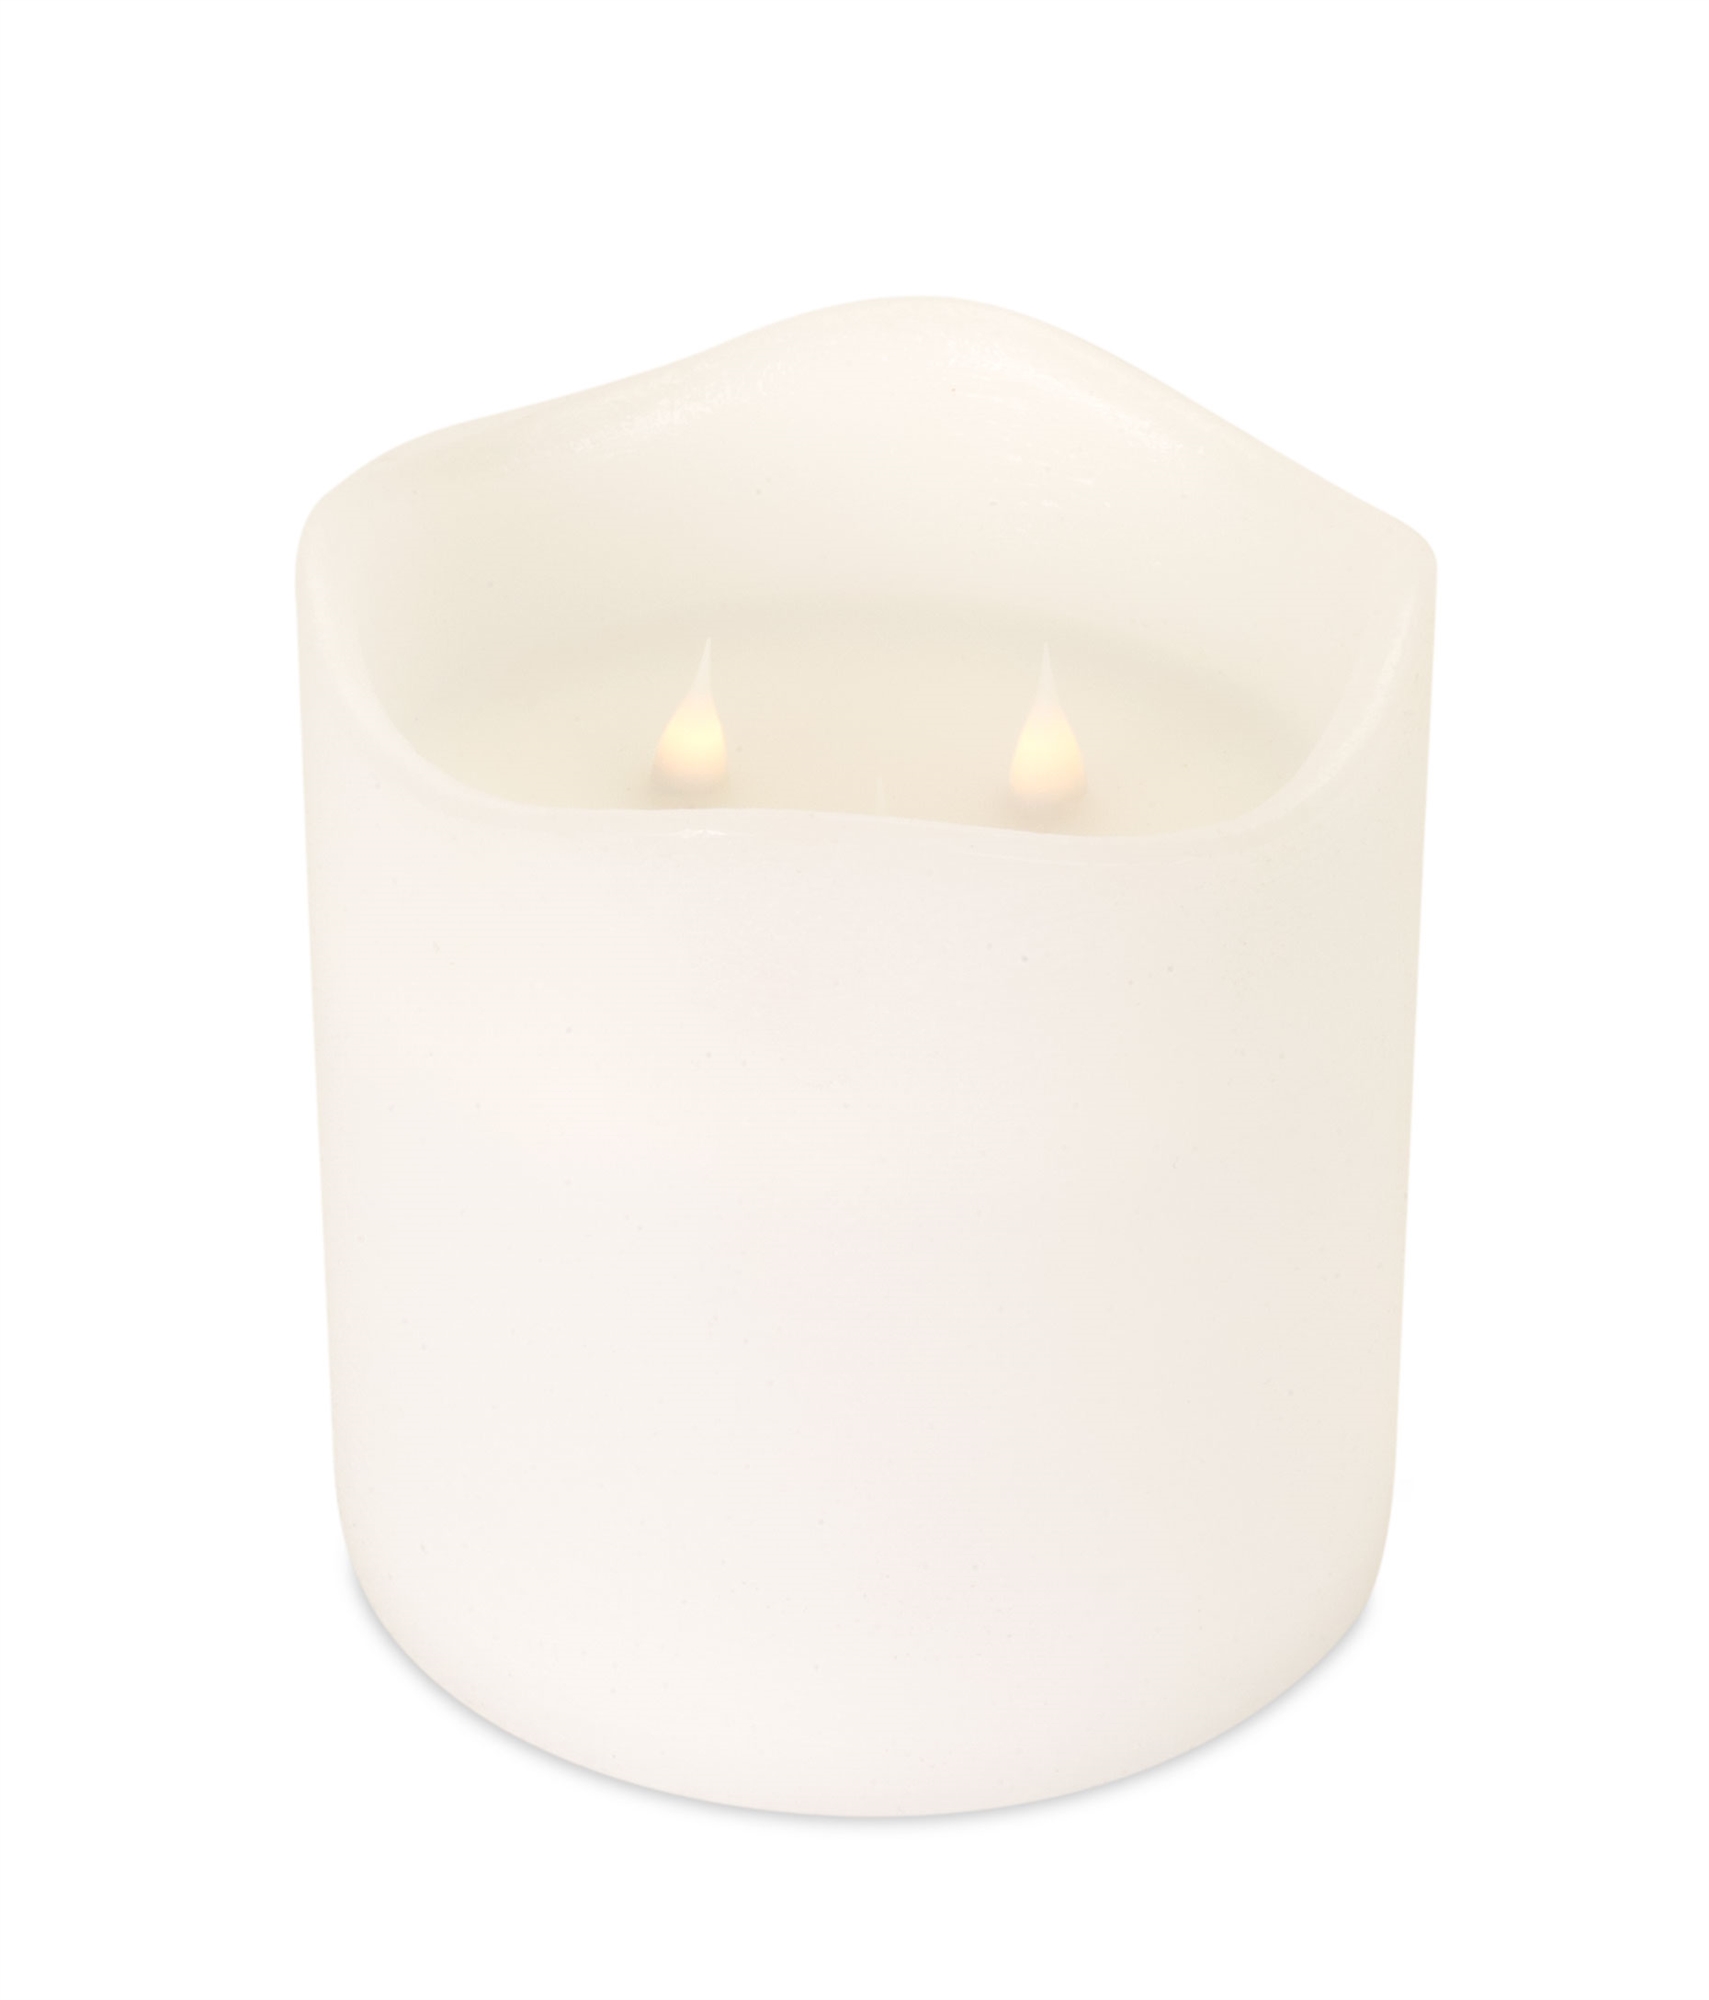 Candle 6"D x 6"H Wax/Plastic